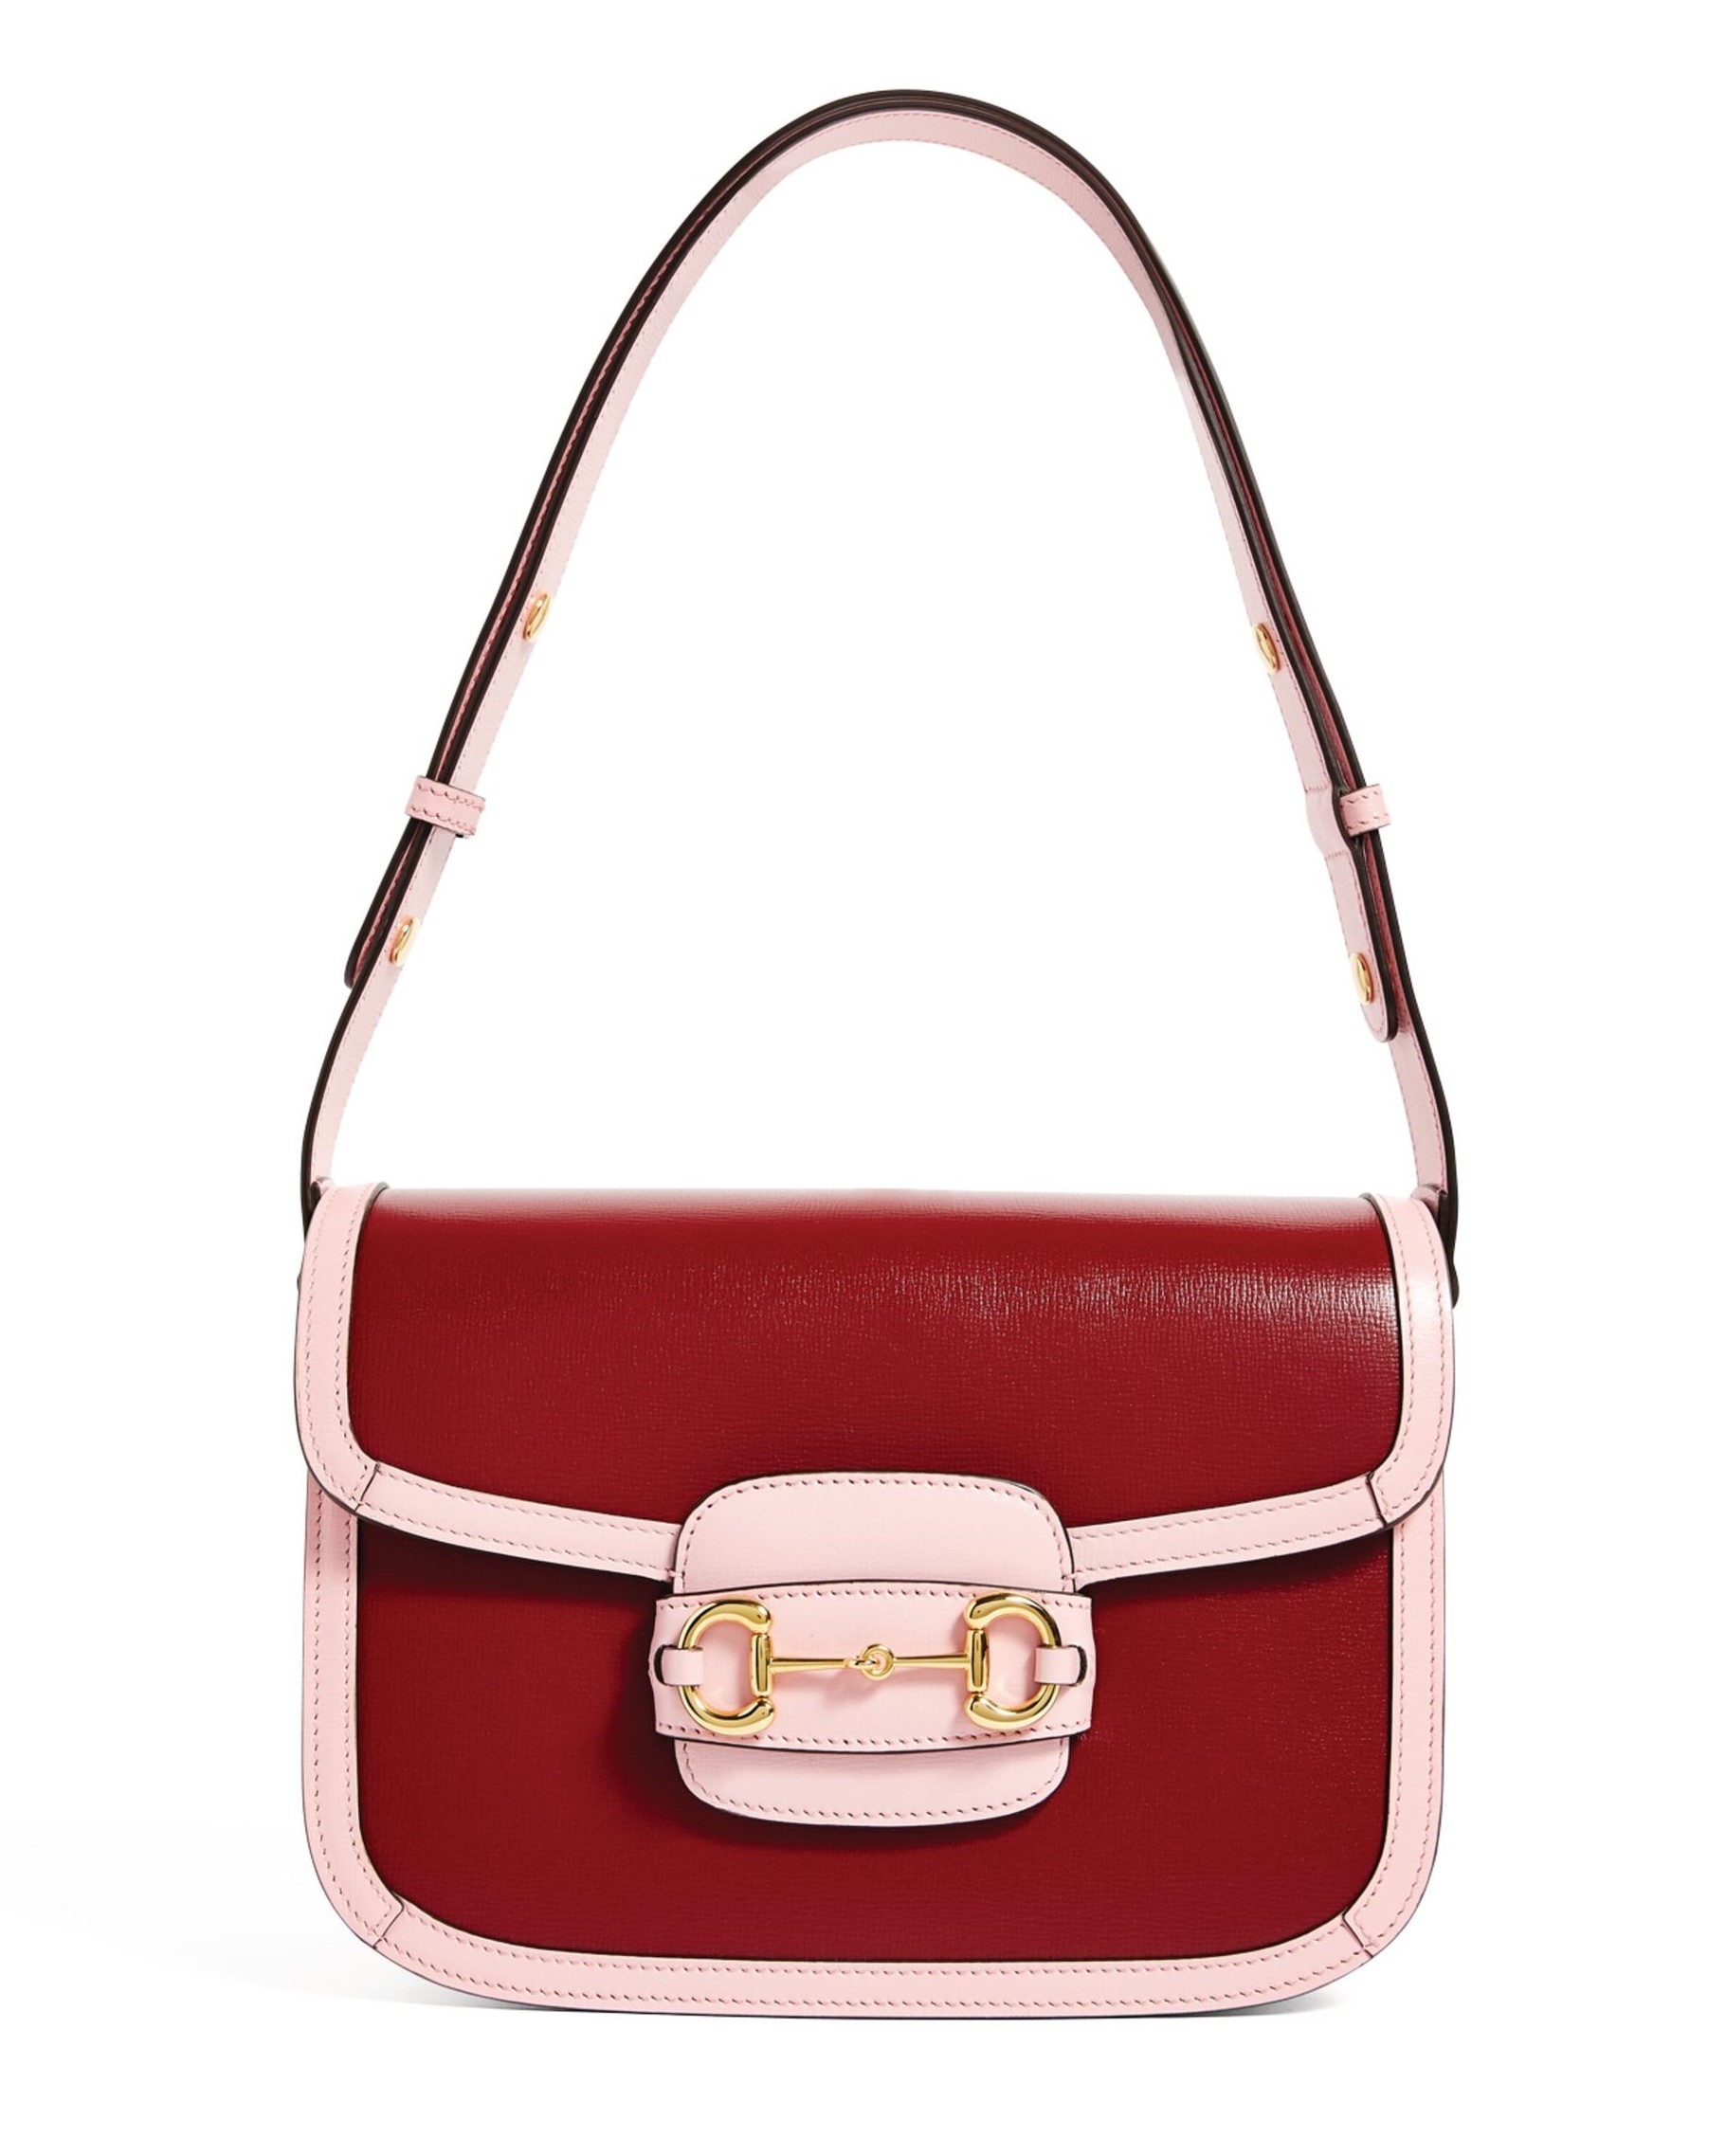 TÚI ĐEO CHÉO NỮ GUCCI 1955 HORSEBIT LEATHER SHOULDER BAG IN RED AND PINK 14